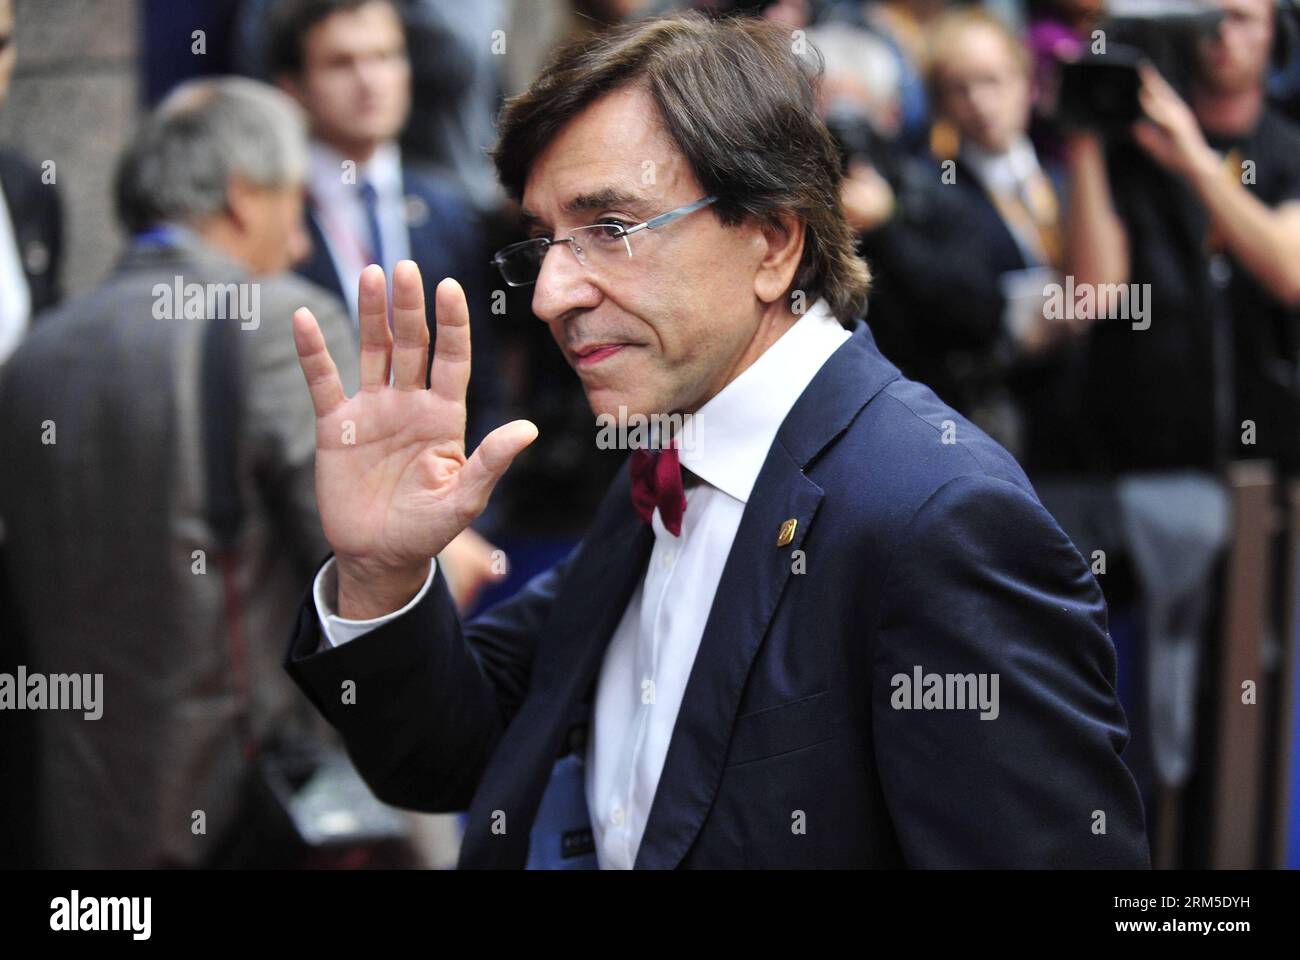 Bildnummer: 60633929  Datum: 24.10.2013  Copyright: imago/Xinhua (131024) -- BRUSSELS, Oct 24, 2013 (Xinhua) -- Belgian Prime Minister Elio Di Rupo arrives for a EU summit at EU s headquarters in Brussels, capital of Belgium, Oct 24, 2013. The two-day EU summit kicked off on Thursday, focusing on economic and social policy issues and the economic and monetary union, as well as developing a consumer and business-friendly Digital Single Market and improving skills.(Xinhua/Ye Pingfan) (yt) BELGIUM-BRUSSELS-EU-SUMMIT PUBLICATIONxNOTxINxCHN People Politik x0x xkg 2013 quer premiumd      60633929 Da Stock Photo